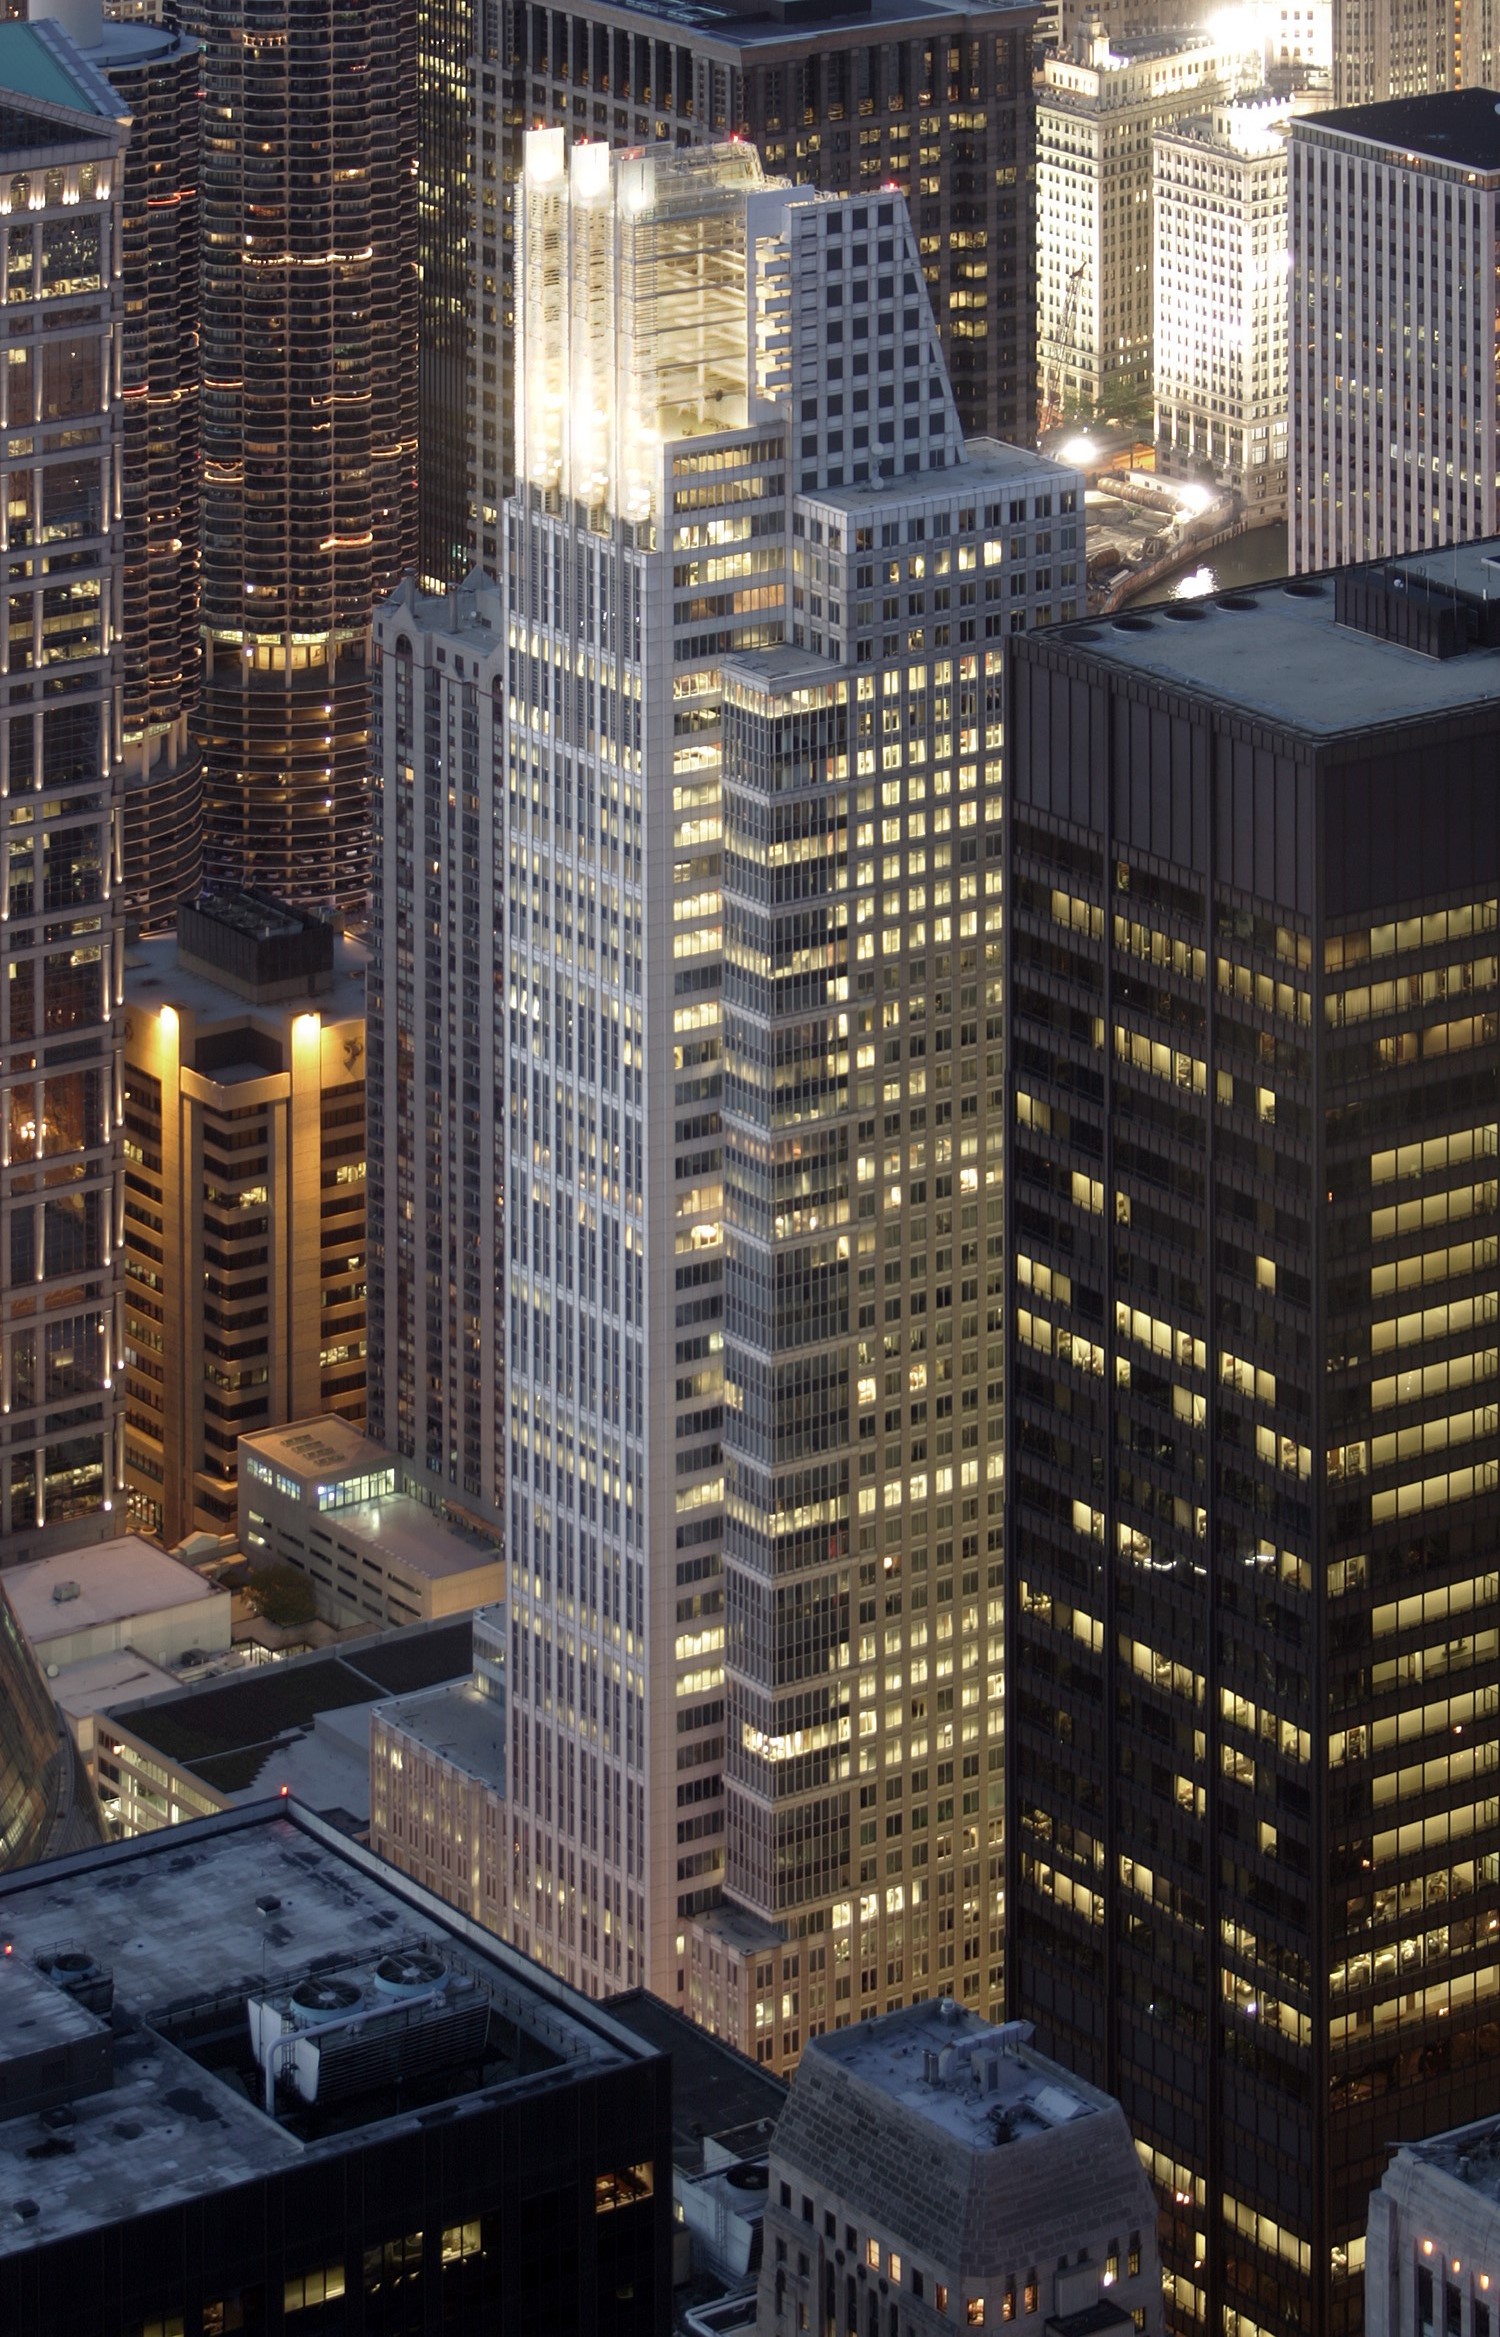 Grant Thornton Tower - Night view from Sears Tower 